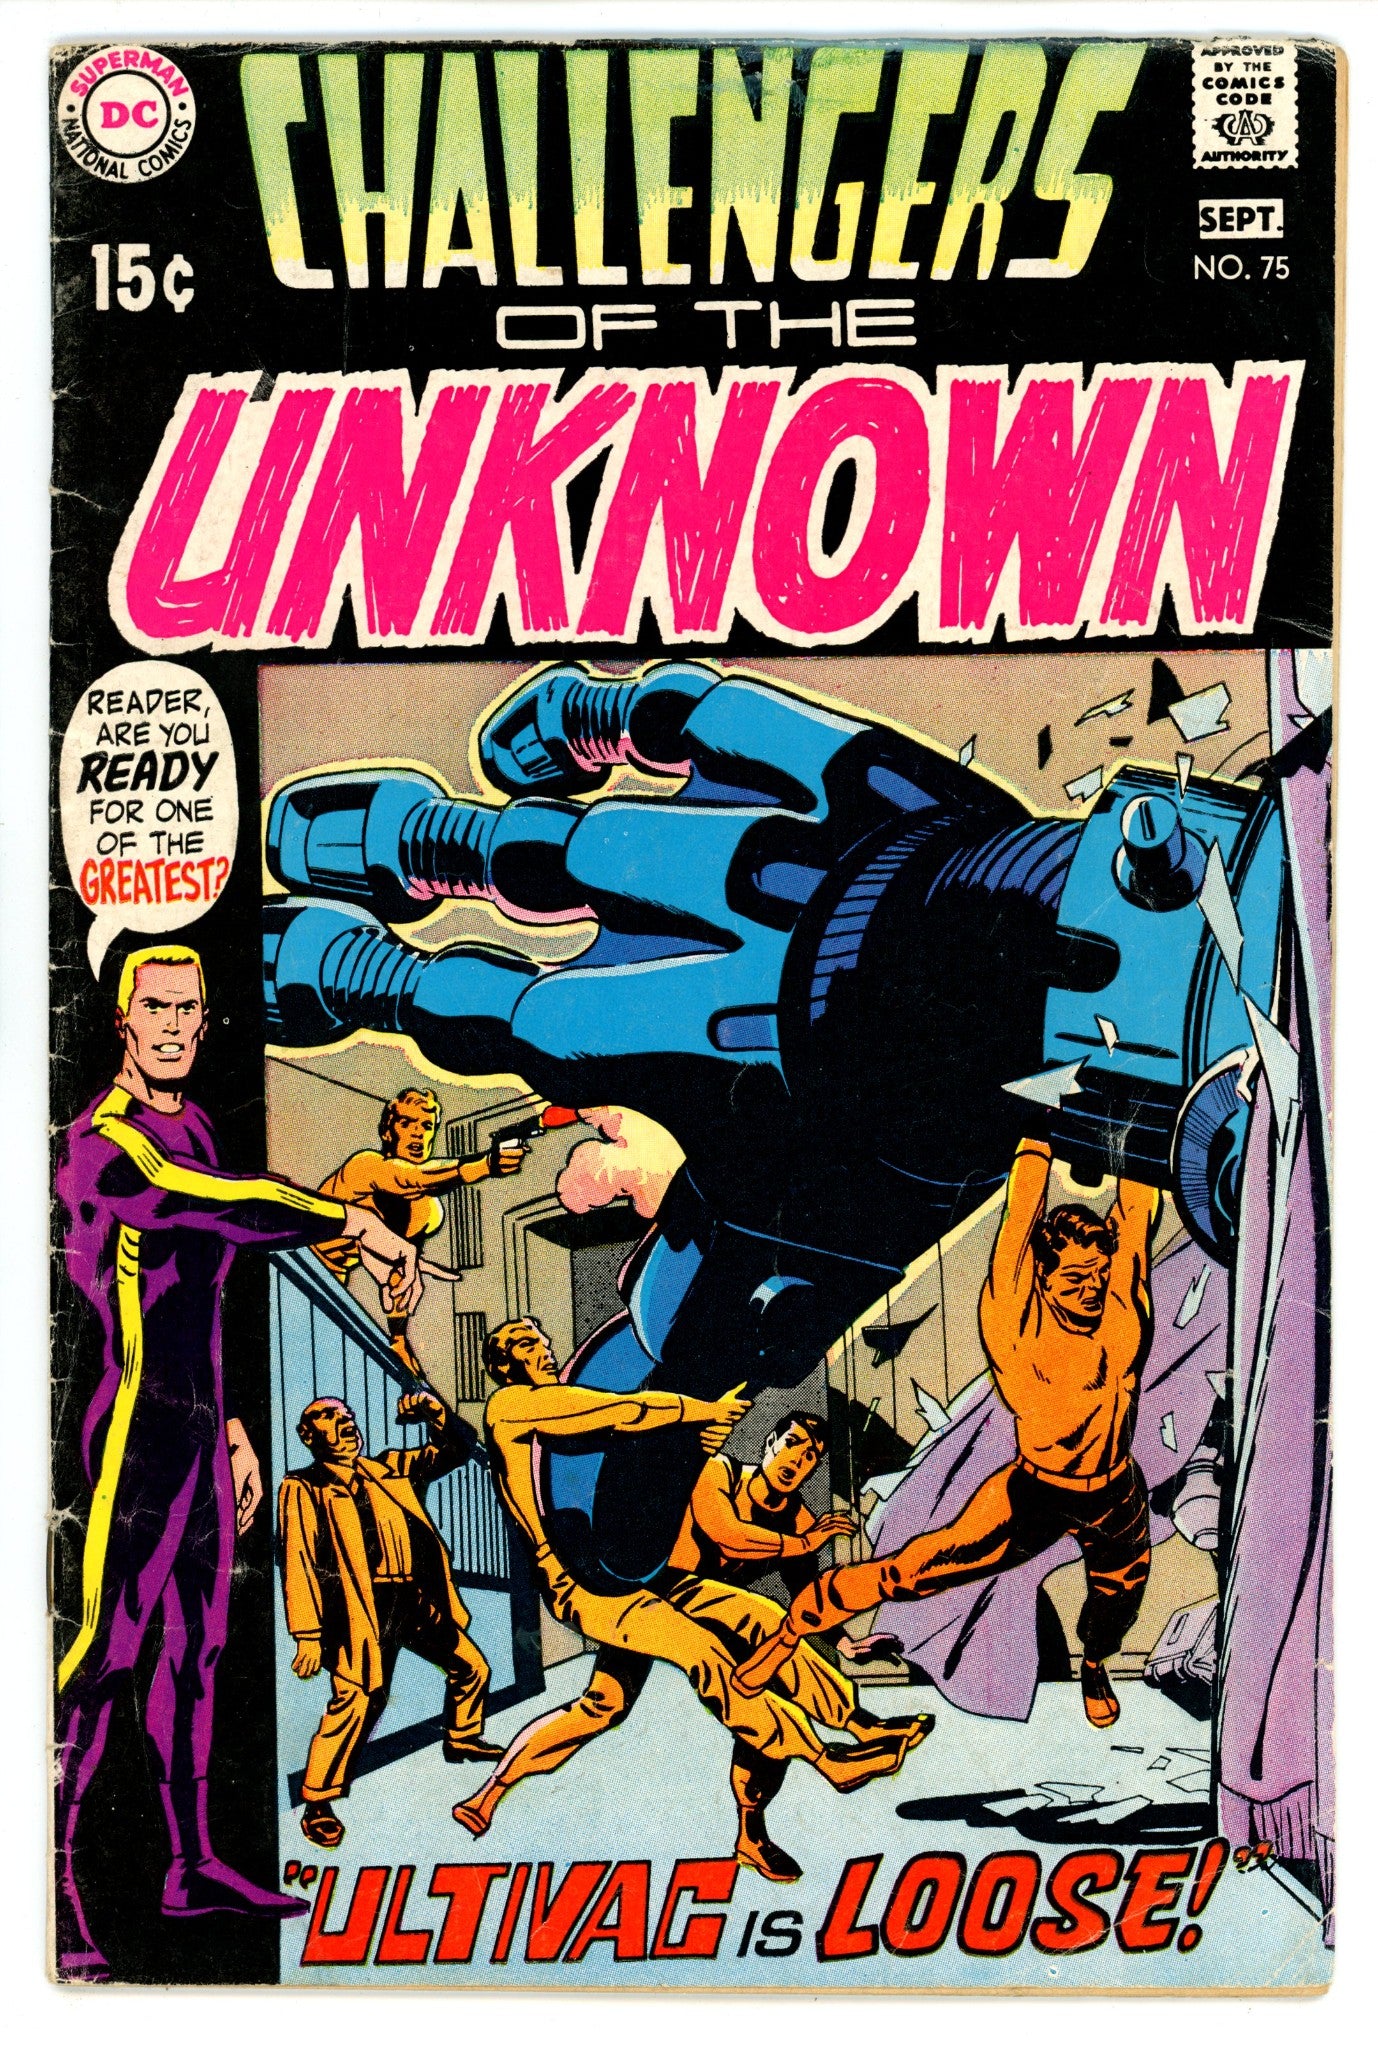 Challengers of the Unknown Vol 1 75 VG (4.0) (1970) 